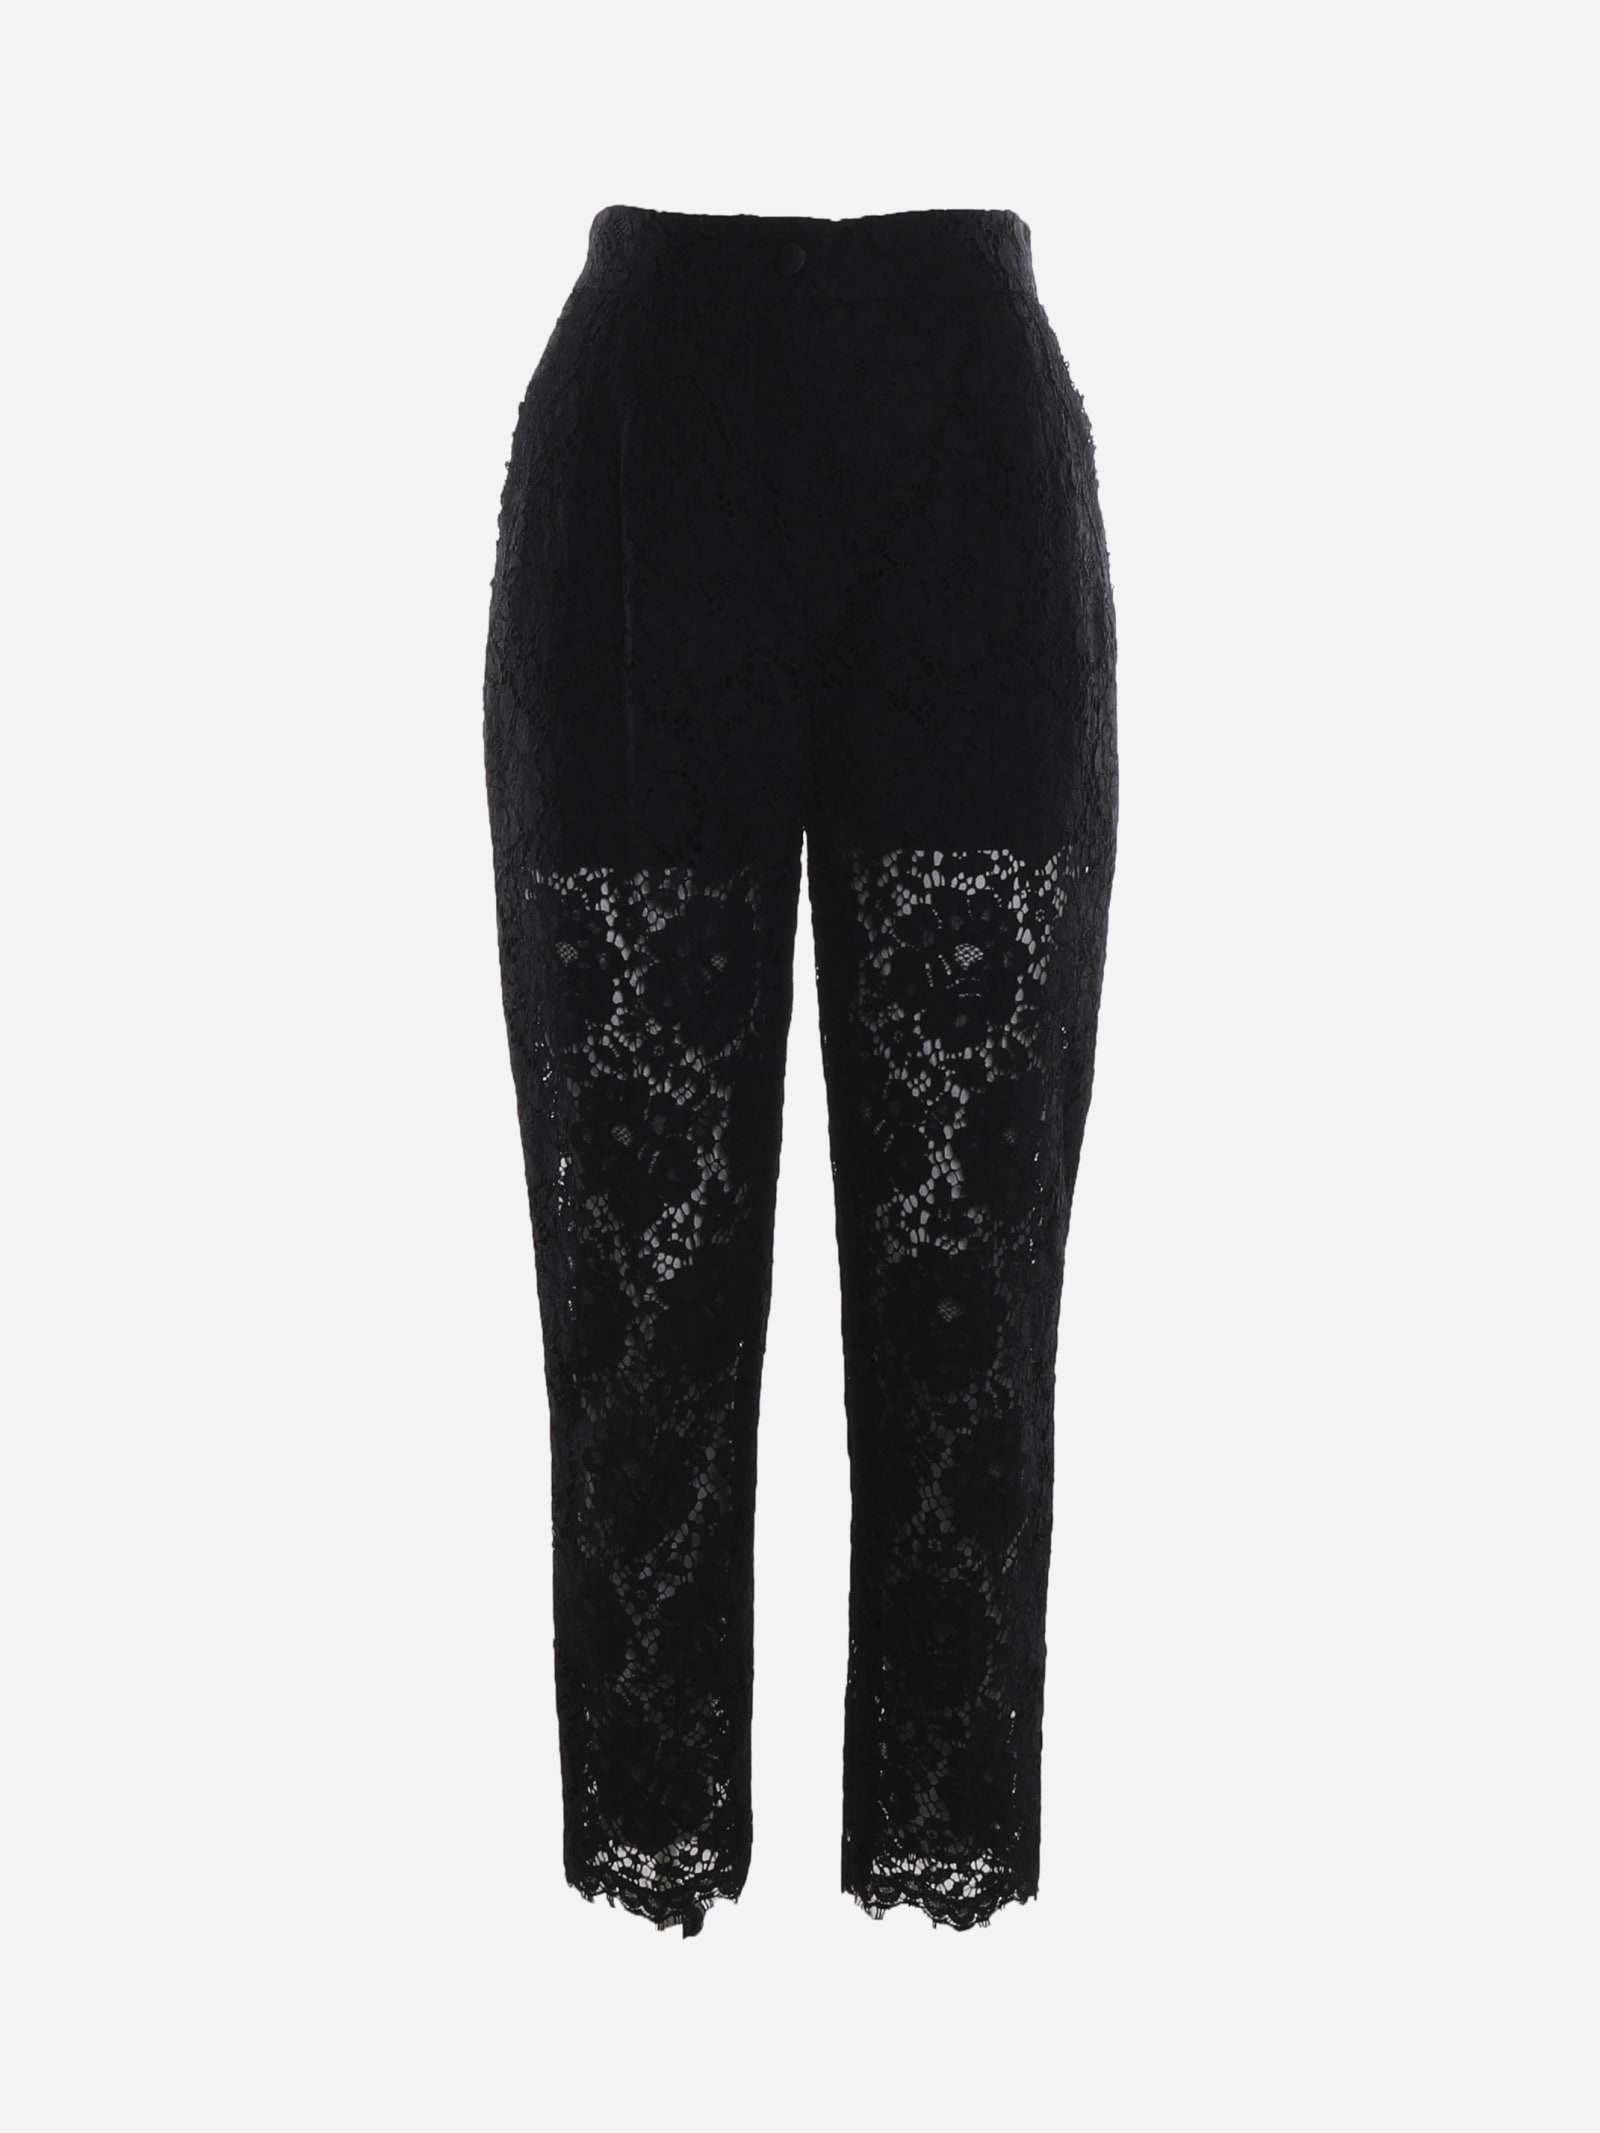 Dolce & Gabbana Black High-waisted Lace Trousers